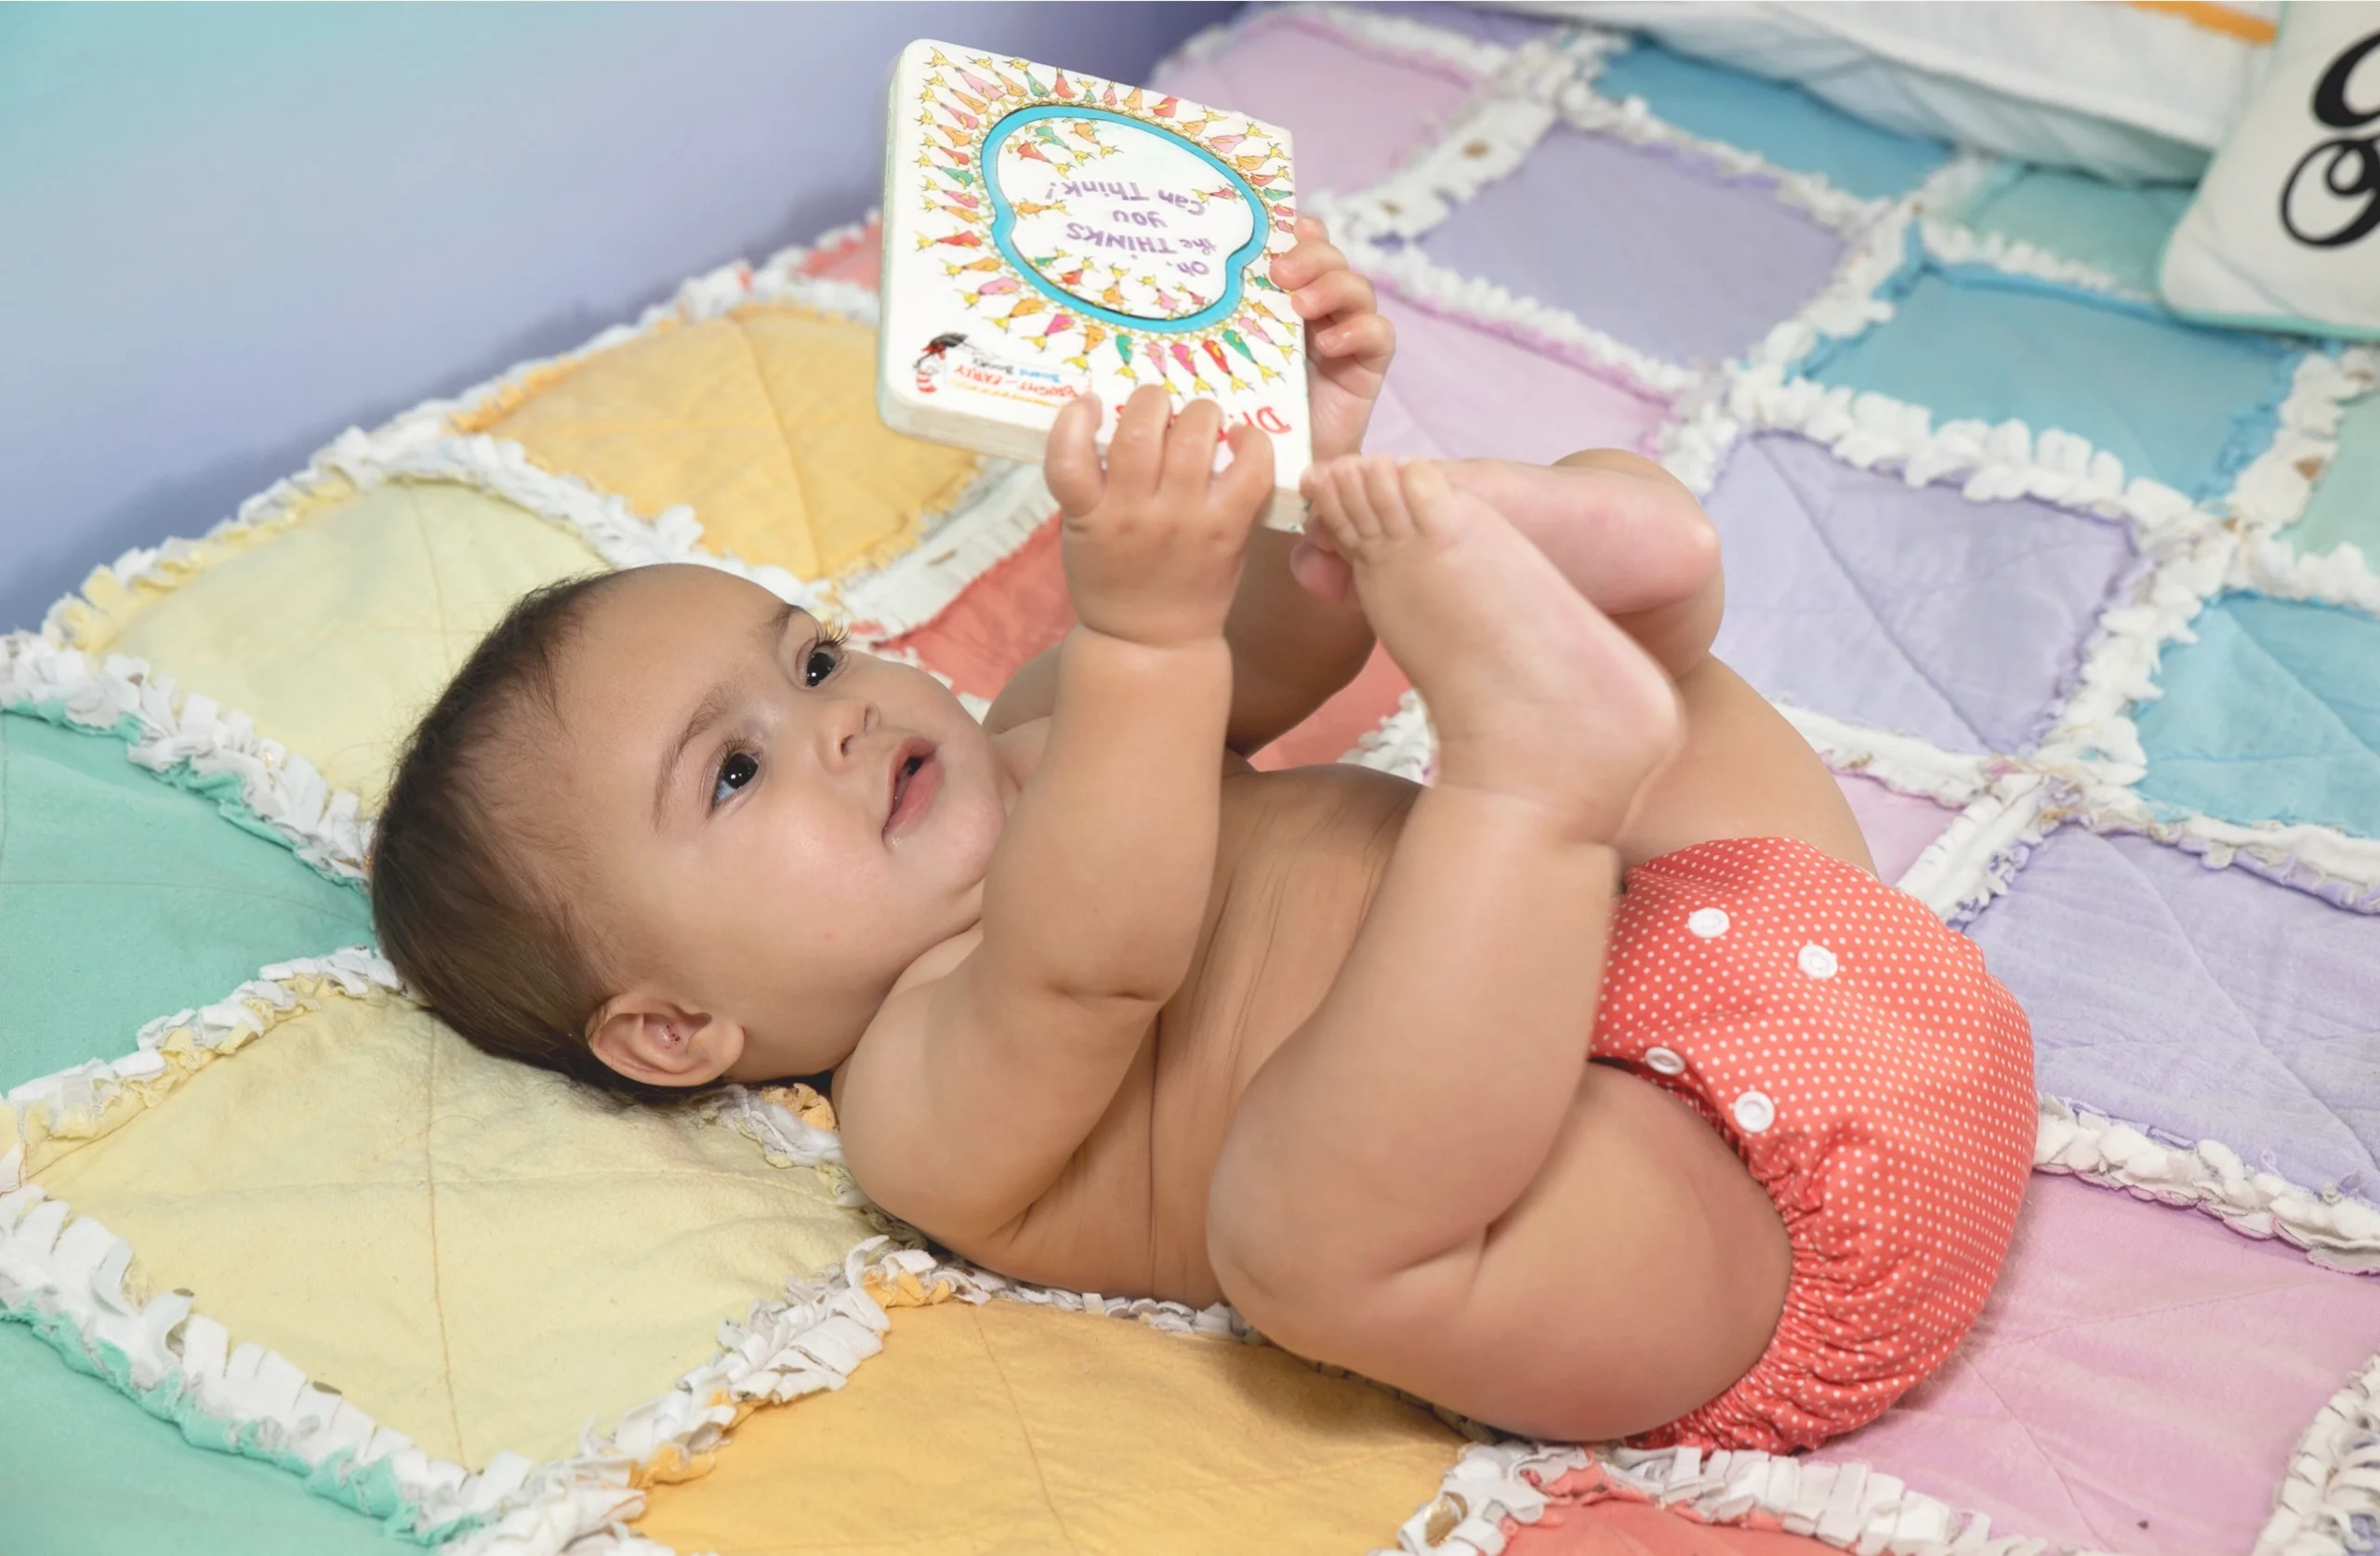 Baby on bed with a book